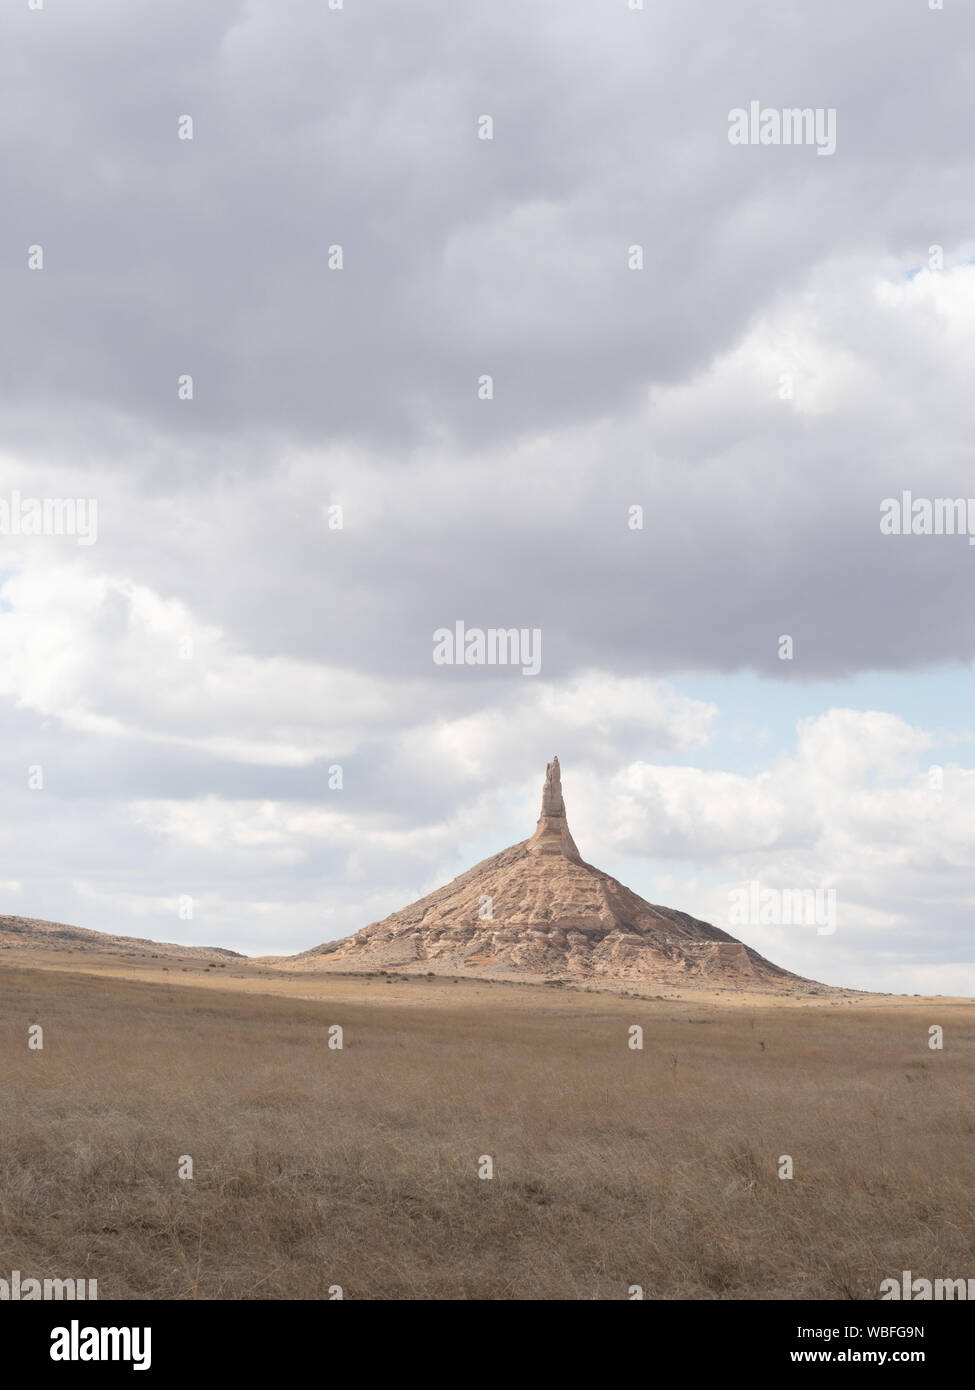 Chimney Rock National Historic Site in Nebraska with field in the foreground and cloudy skies above. Stock Photo